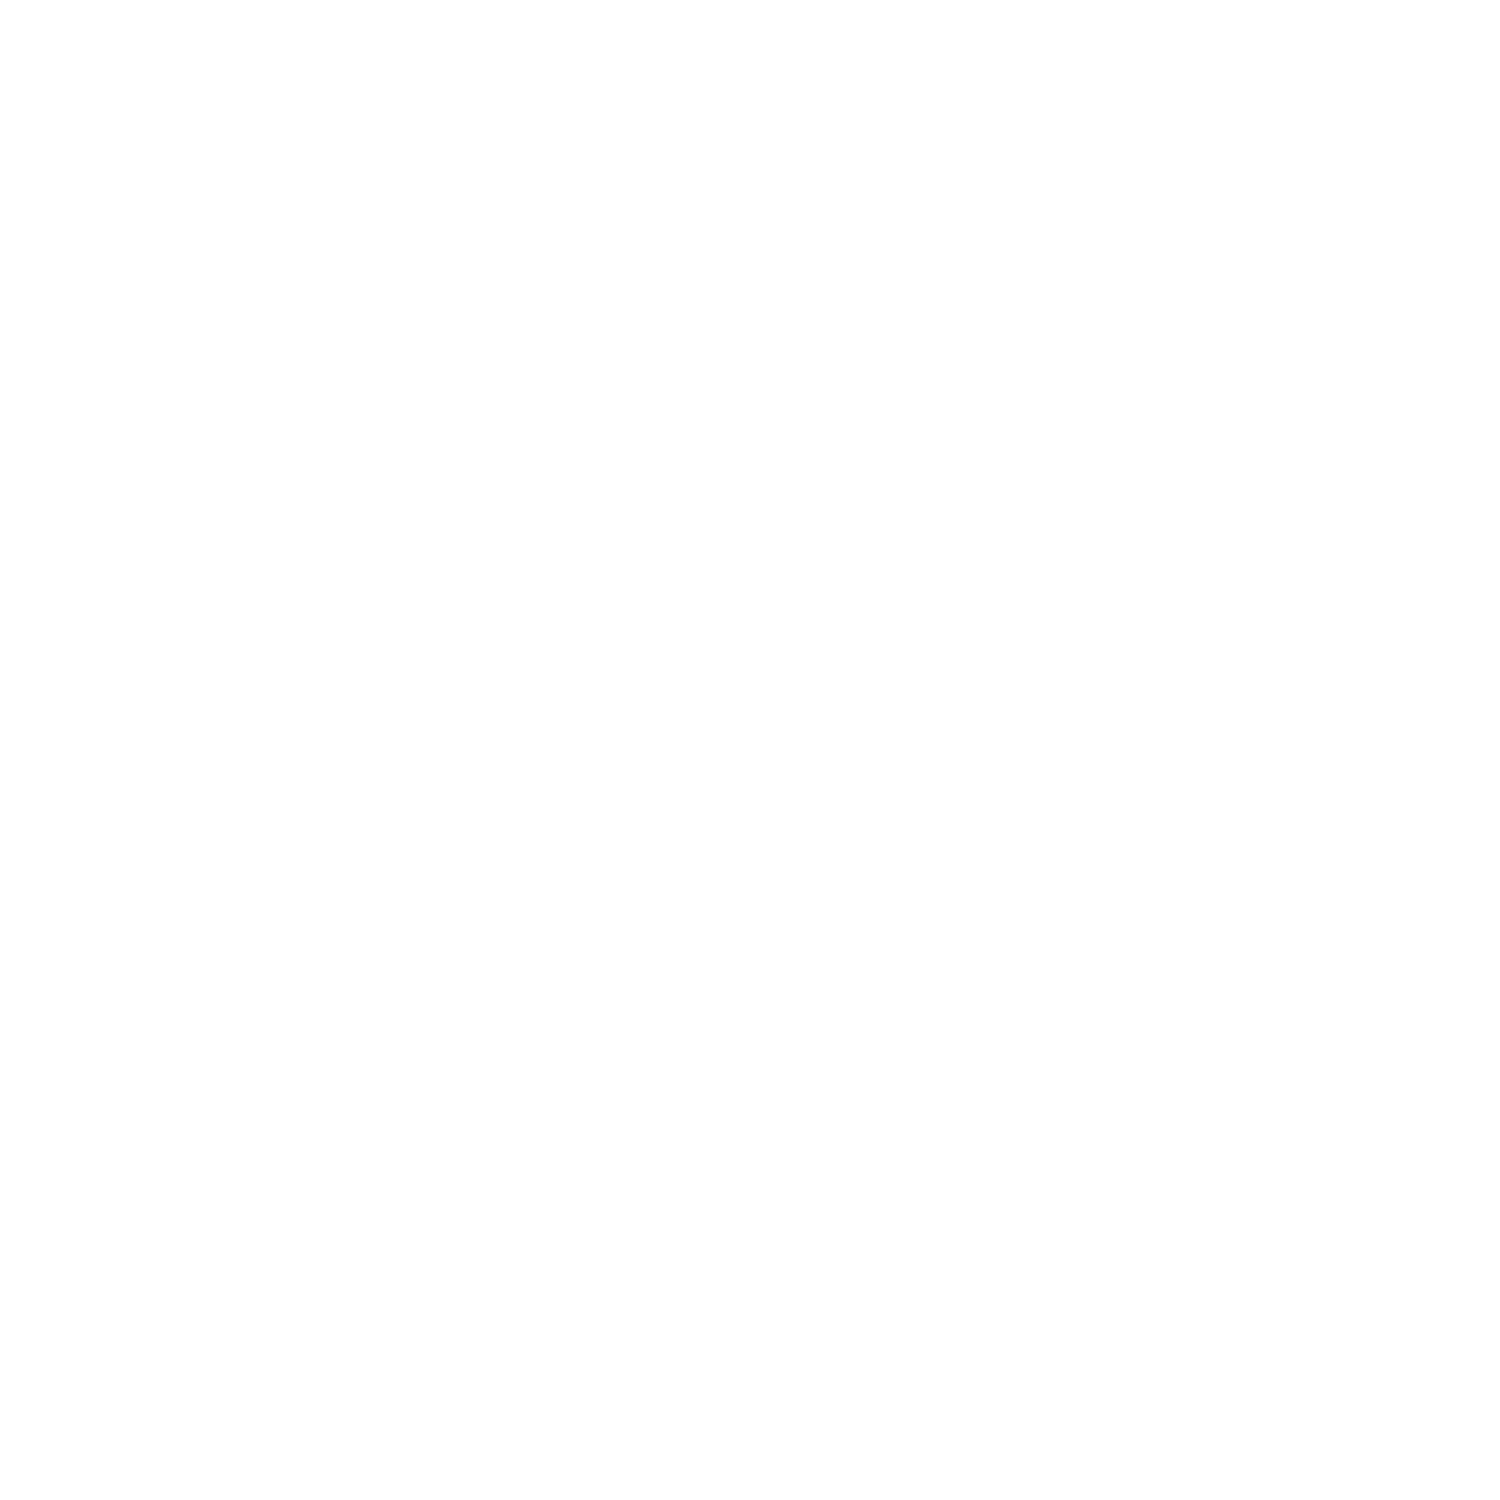 EMERTAINMENT MONTHLY